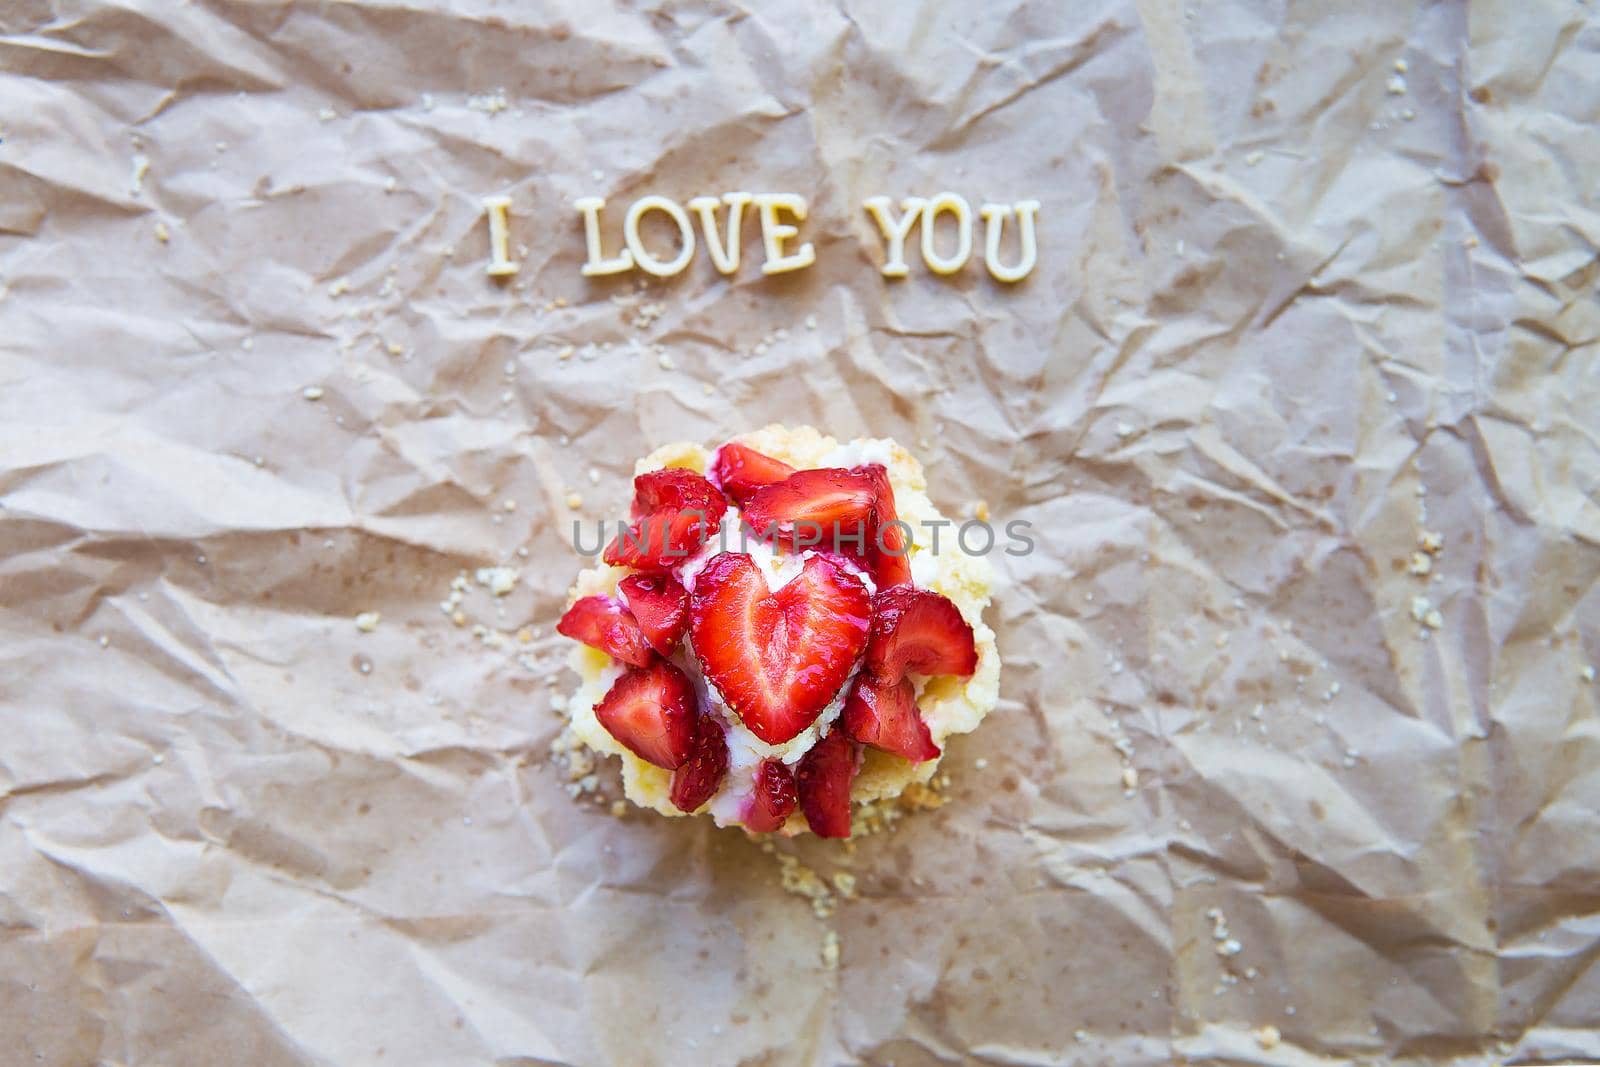 Bright cupcake with strawberries lies on craft paper, the inscription I love you.